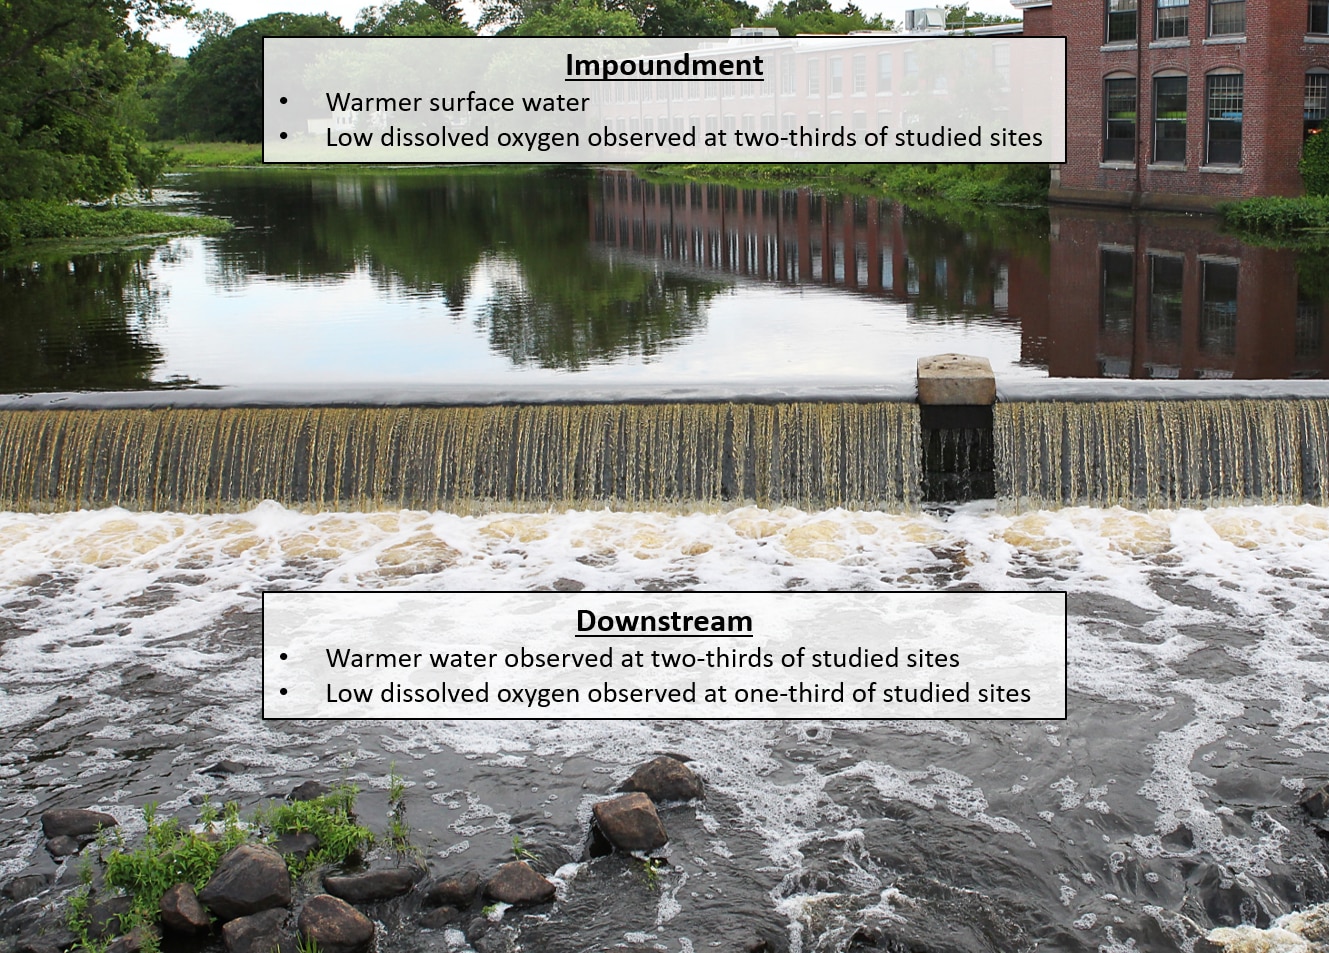 A photo of water flowing over a dam with text "Impoundment: warmer surface water, low dissolved oxygen observed at two-thirds of studied sites" above the dam and the text "downstream: warmer water observed at tow/thirds of studied sites, low dissolved oxygen observed at one-third of studied sites" below the dam.